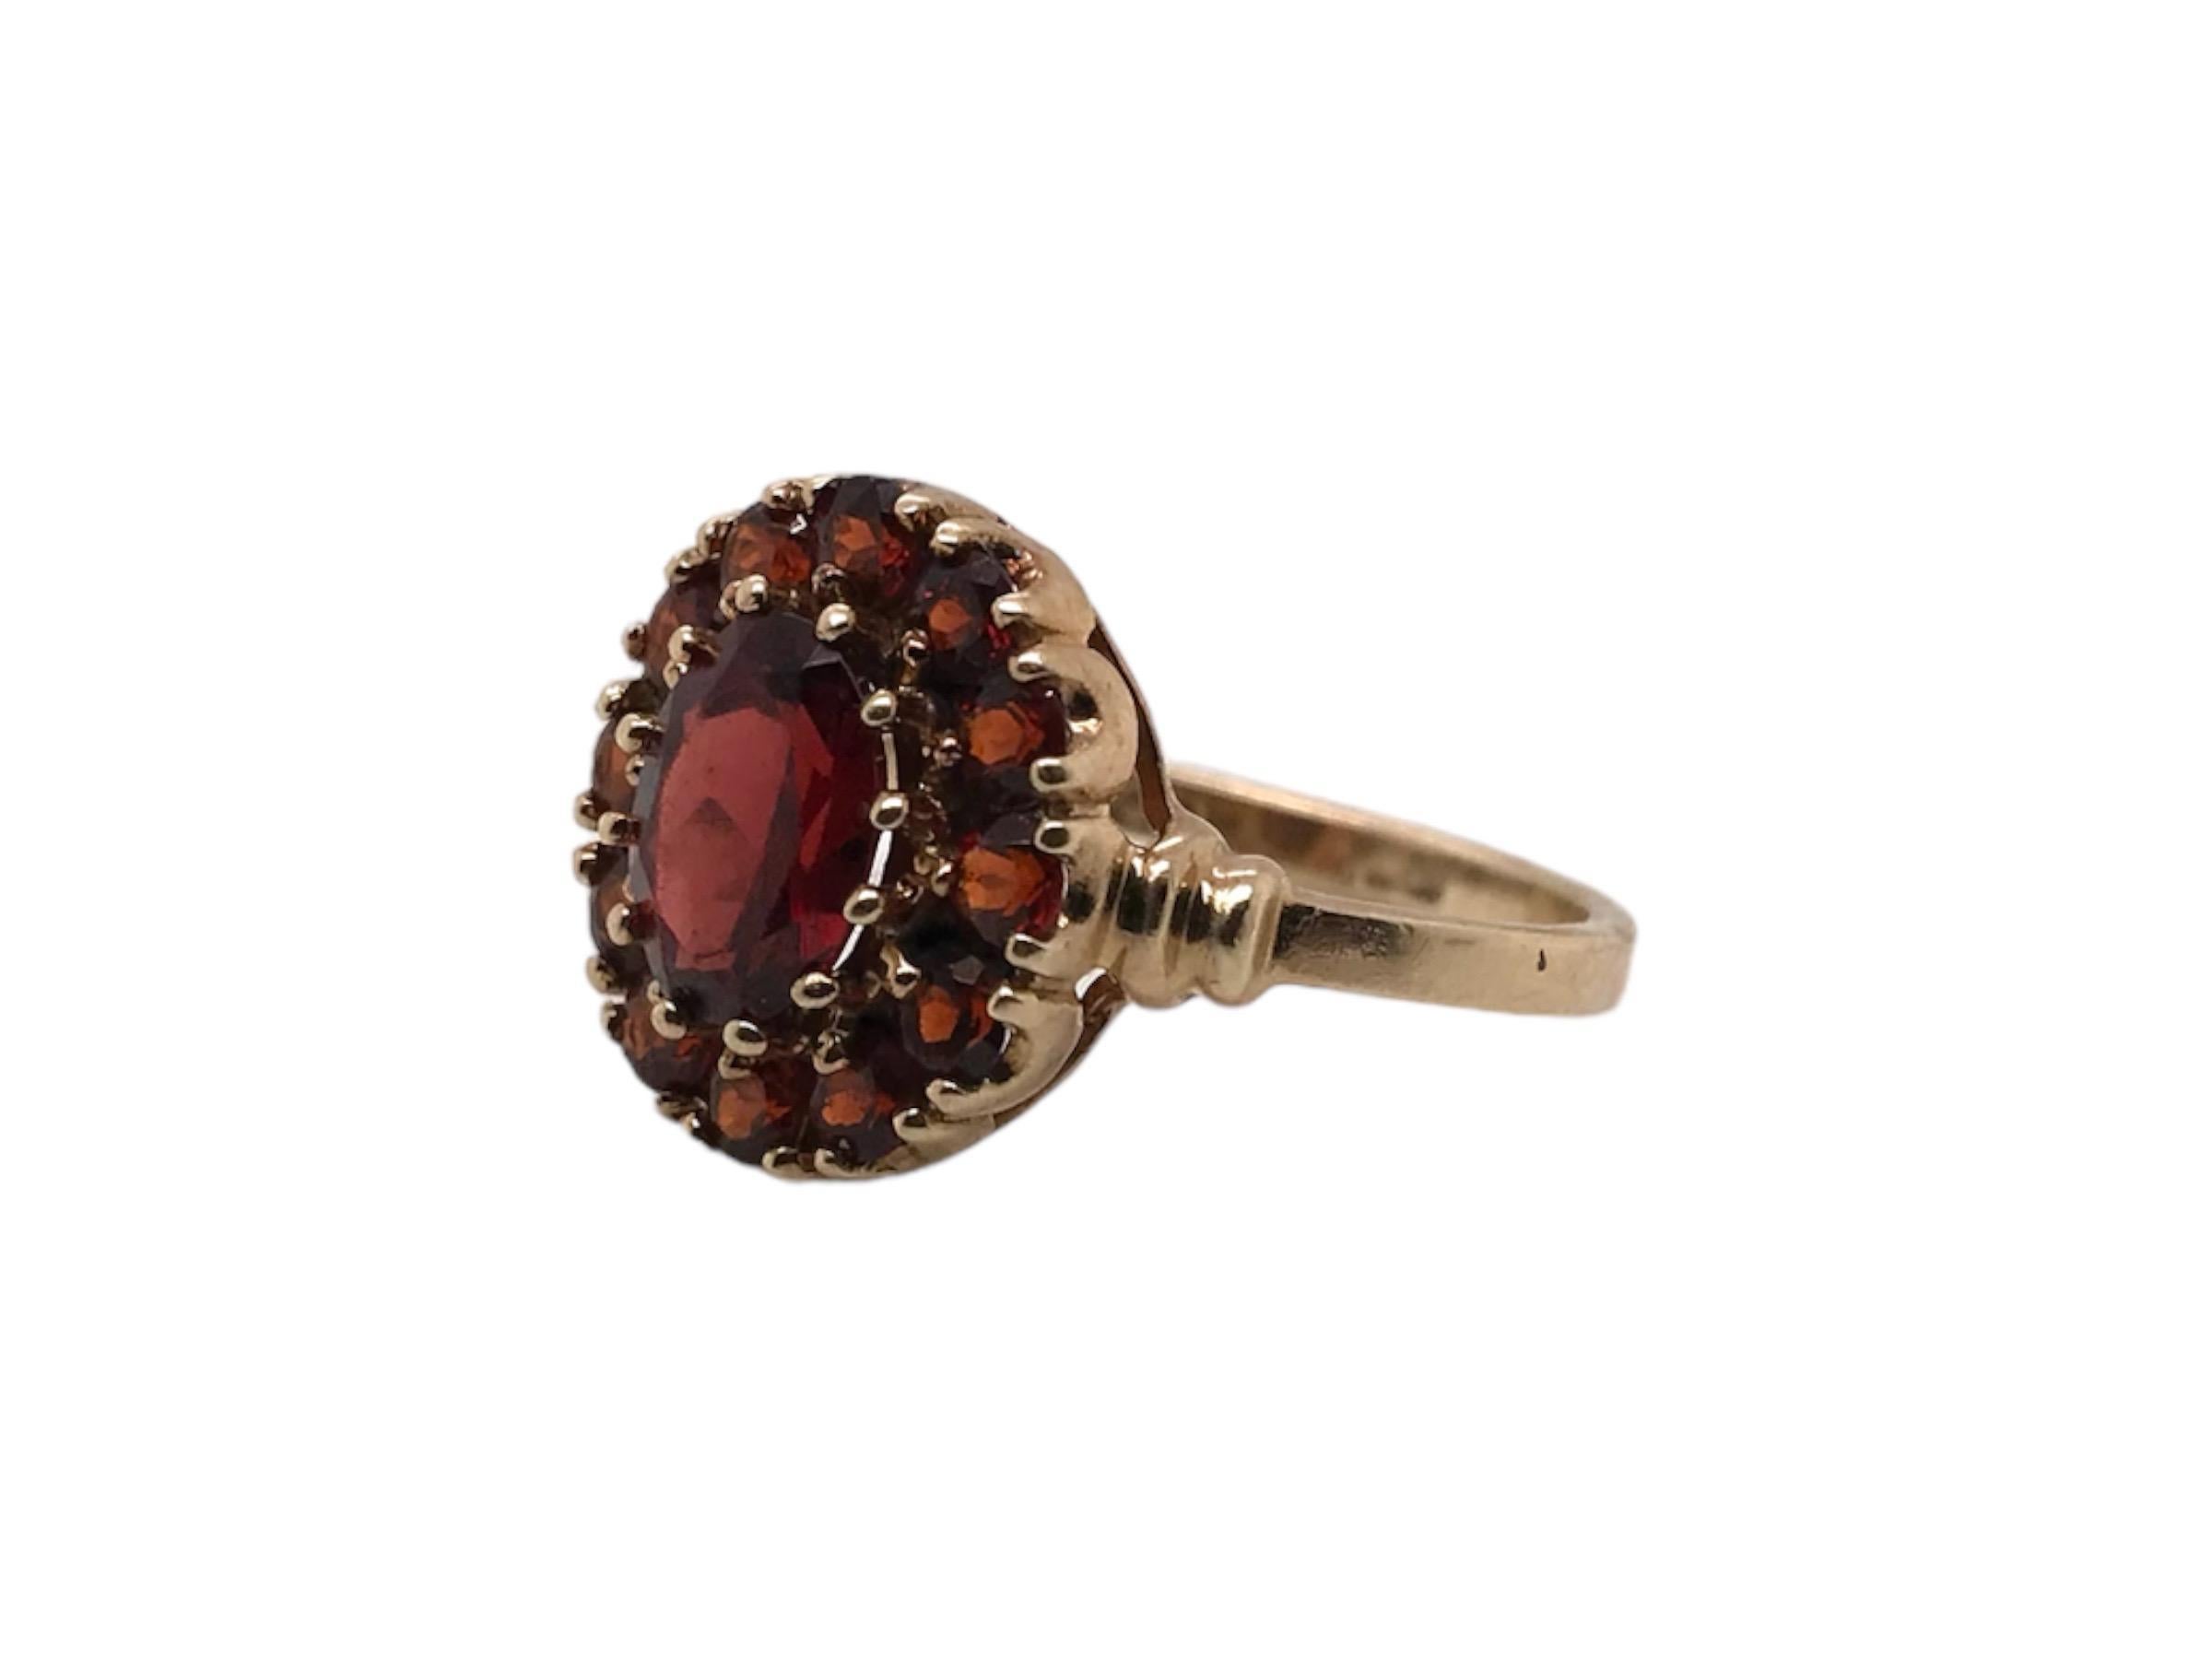 Retro Era Garnet Cocktail Ring 10K Yellow Gold In Excellent Condition For Sale In Montgomery, AL